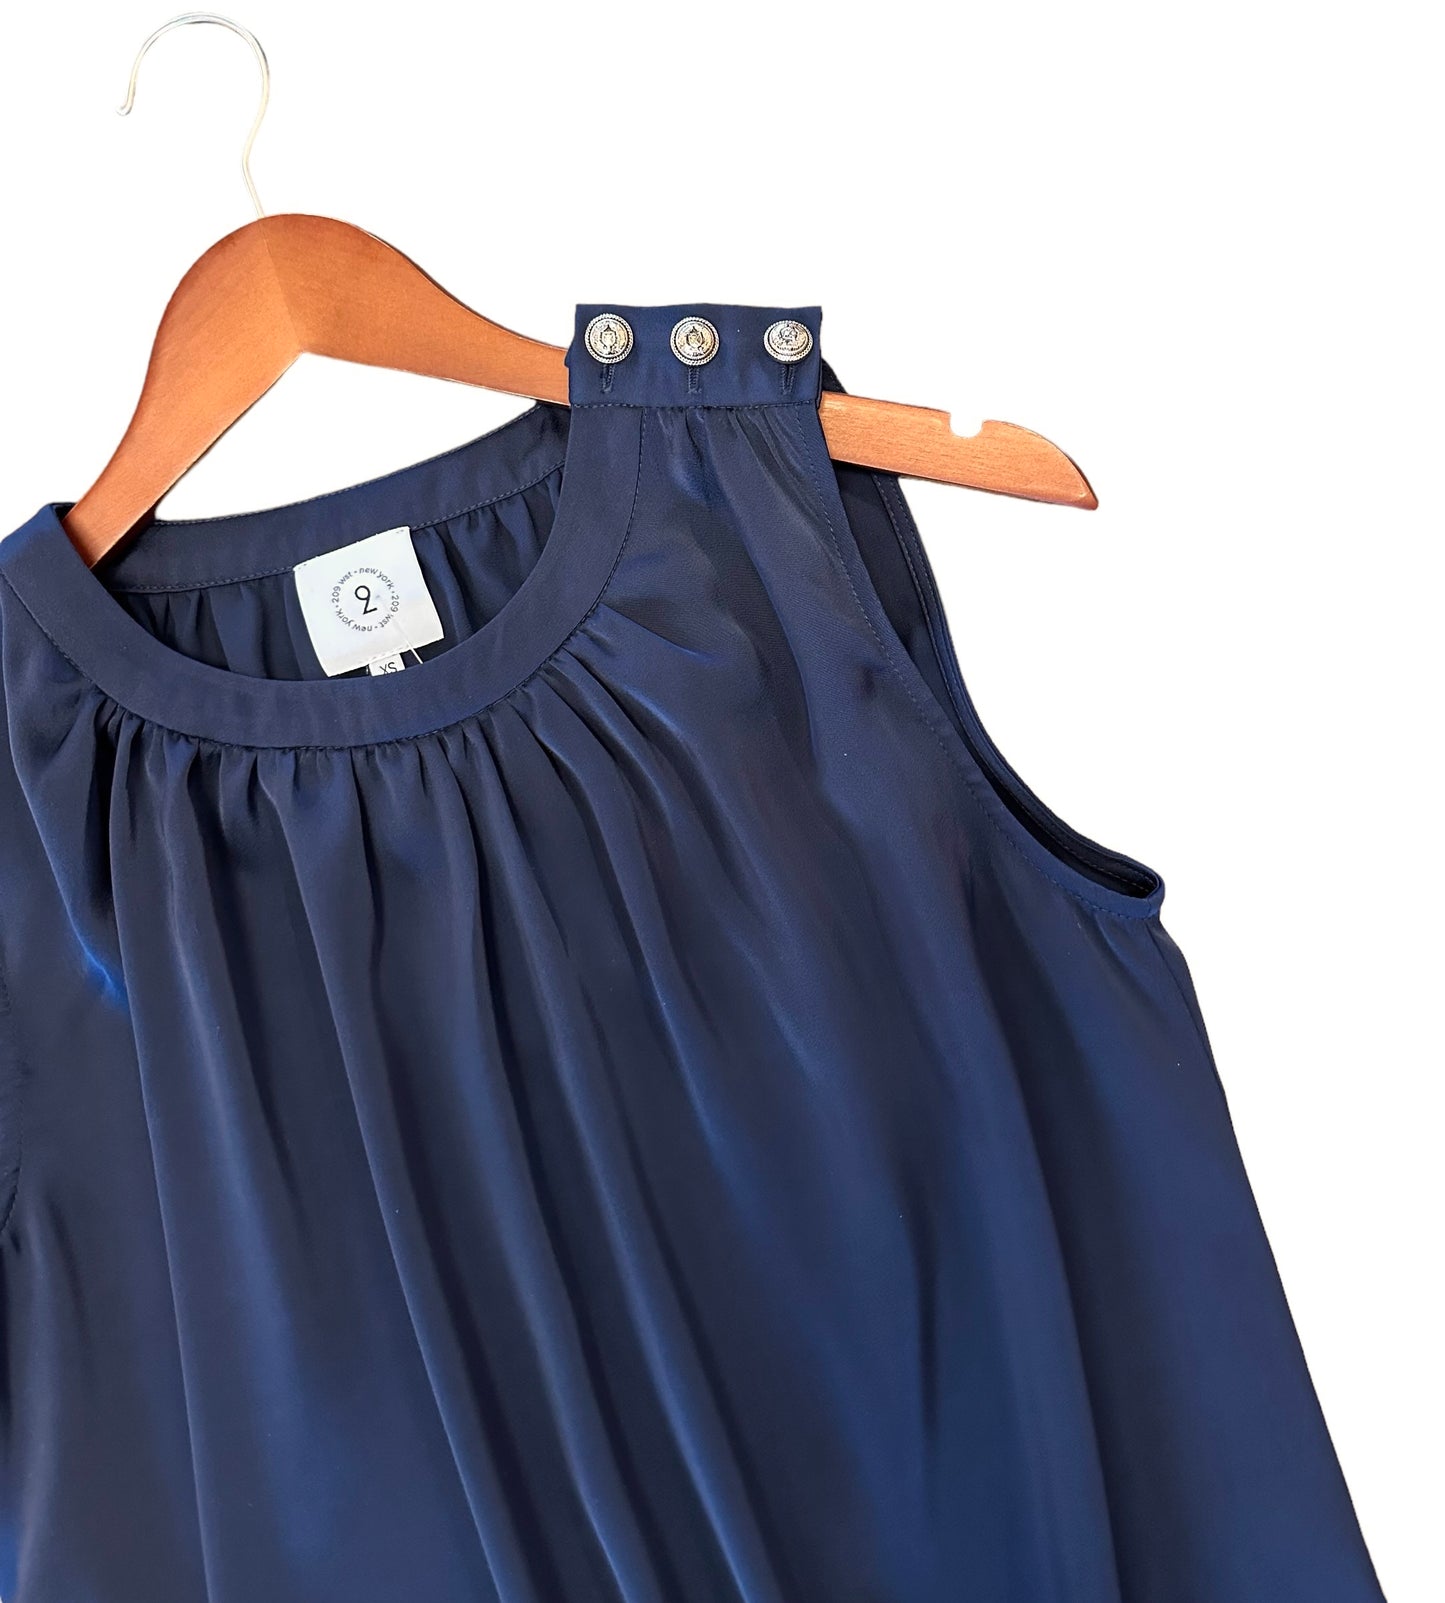 Sleeveless Top in navy by 209